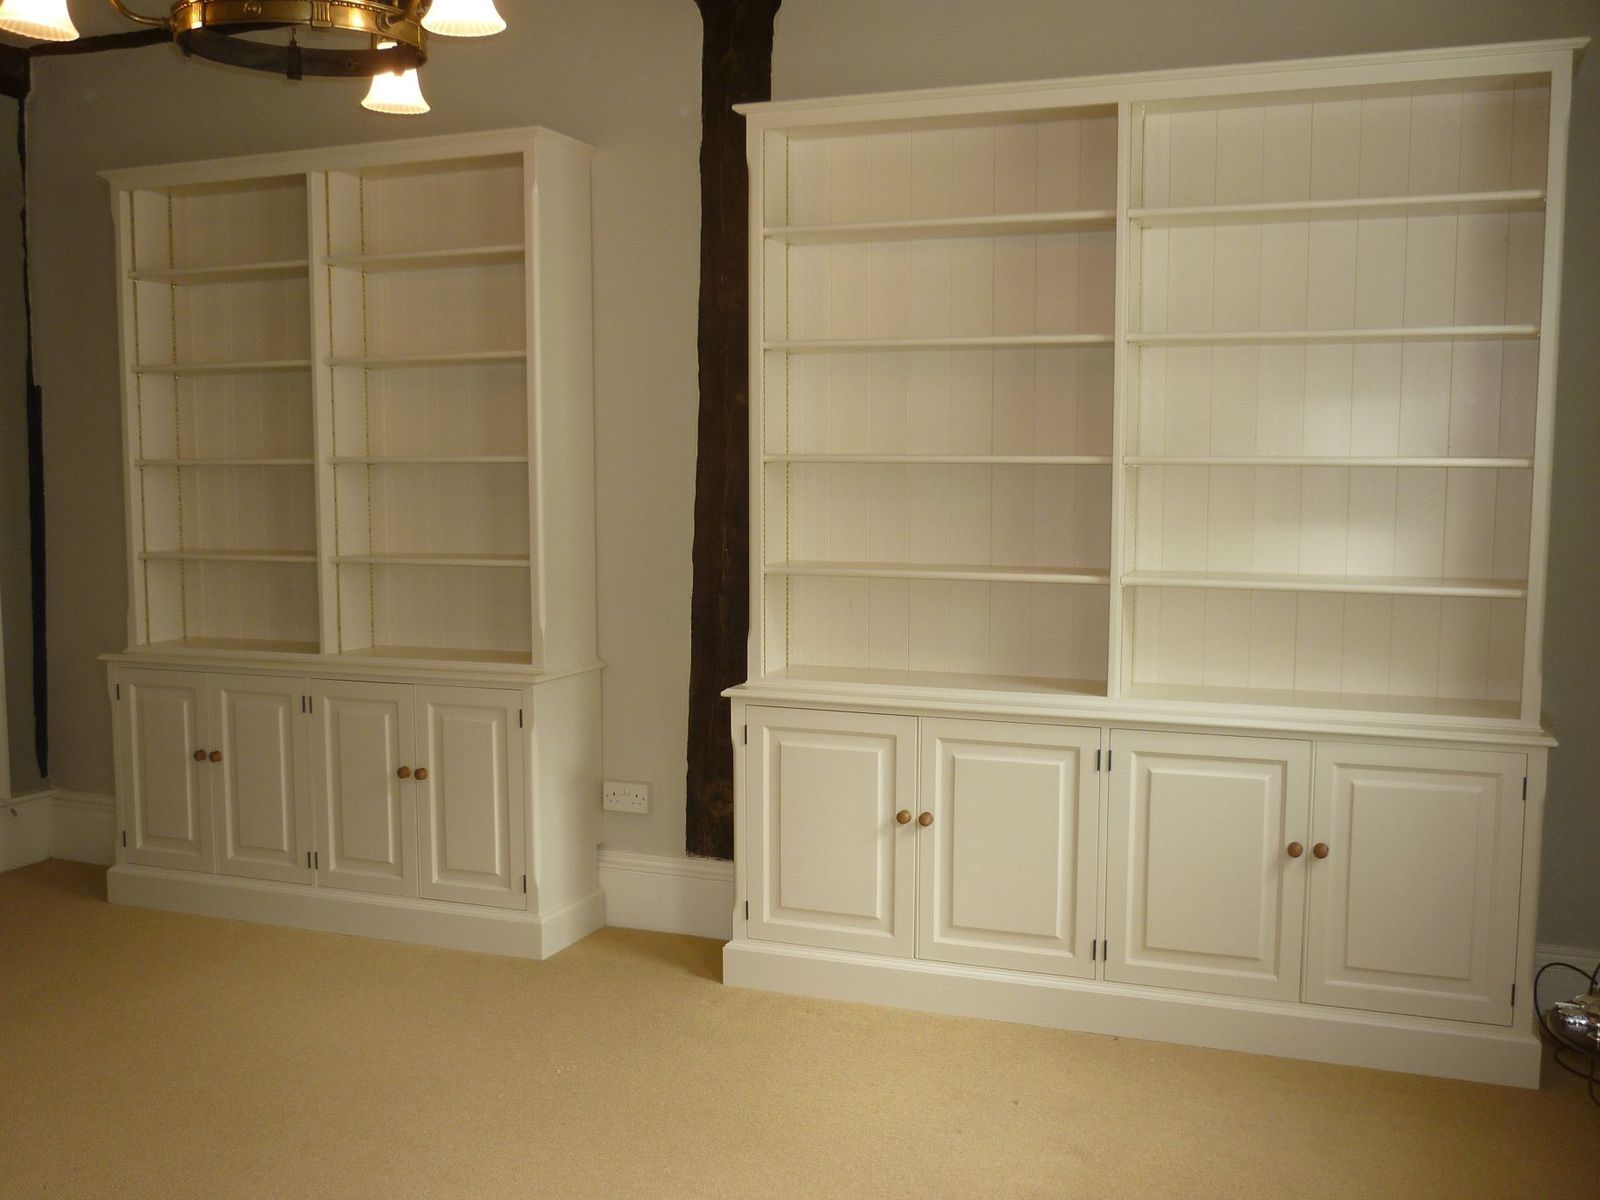 Of Painted Library Bookcase Bookcases Pine Oak Painted And Inside Painted Oak Bookcase (View 8 of 15)